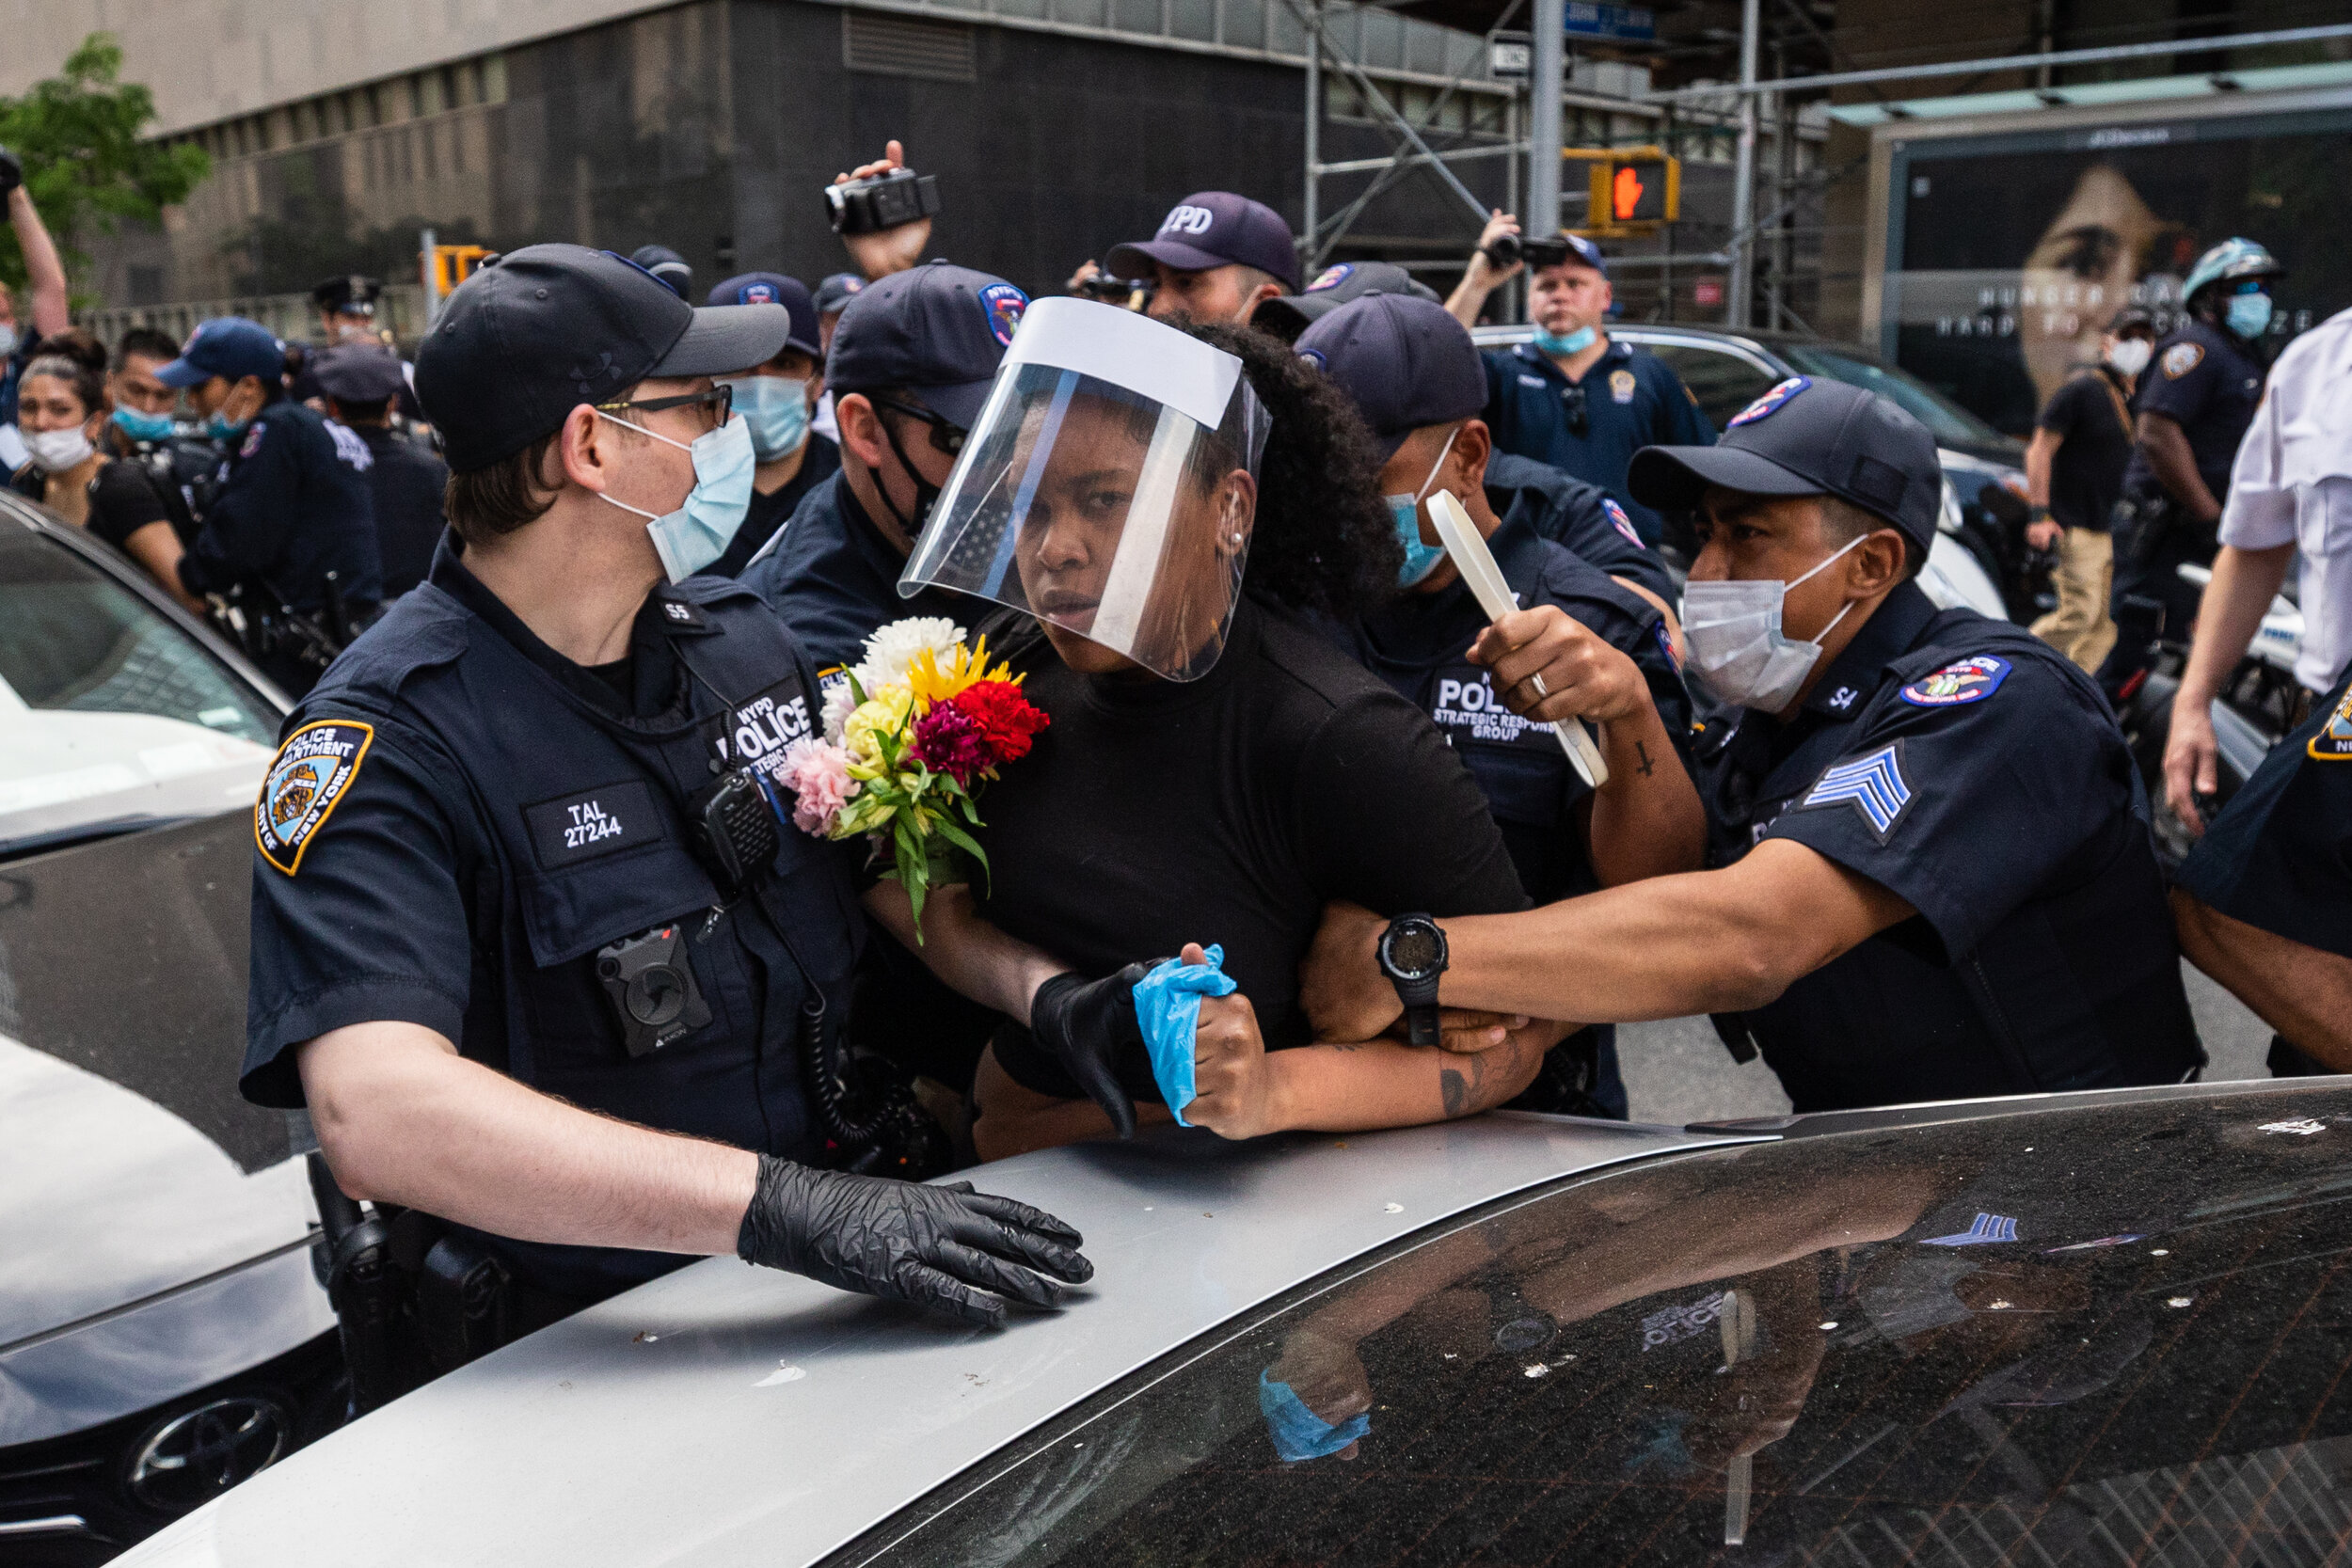  May 29, 2020: New York, NY -   A woman is detained as protesters clash with NYPD officers near Foley Square after George Floyd was killed while being detained by Minneapolis police on May 25.  